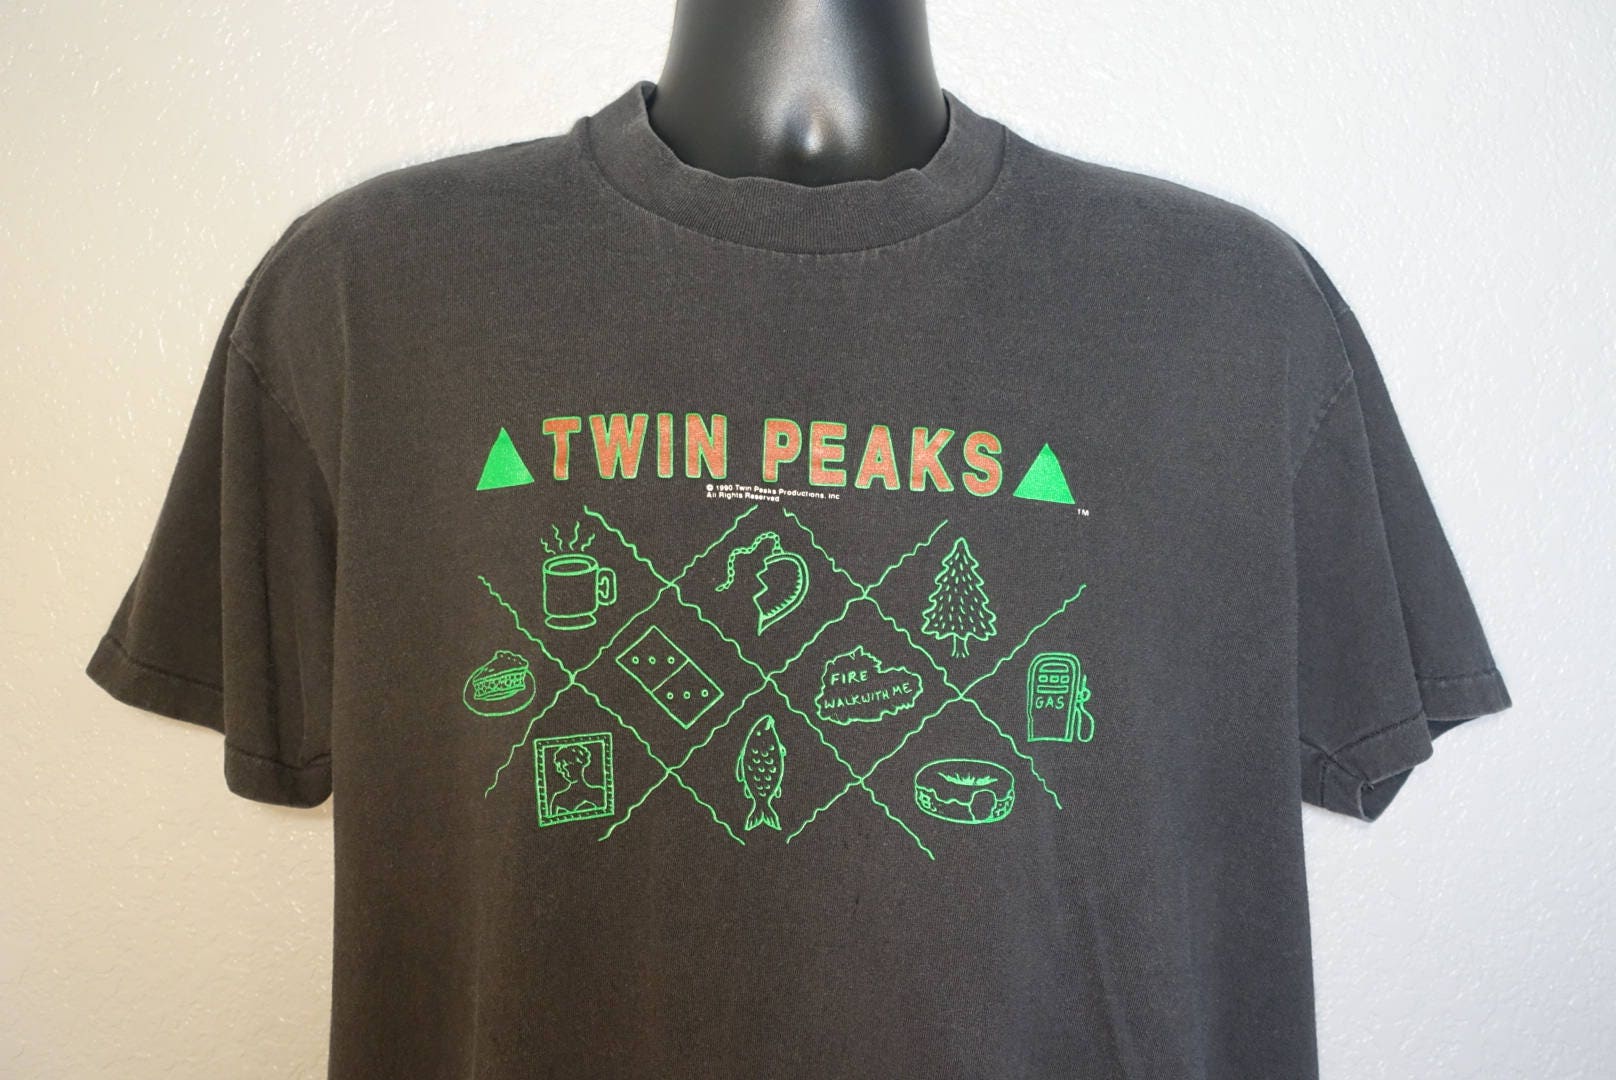 1990 RARE Twin Peaks Promotional - Fire Walk With Me - Vintage T-Shirt